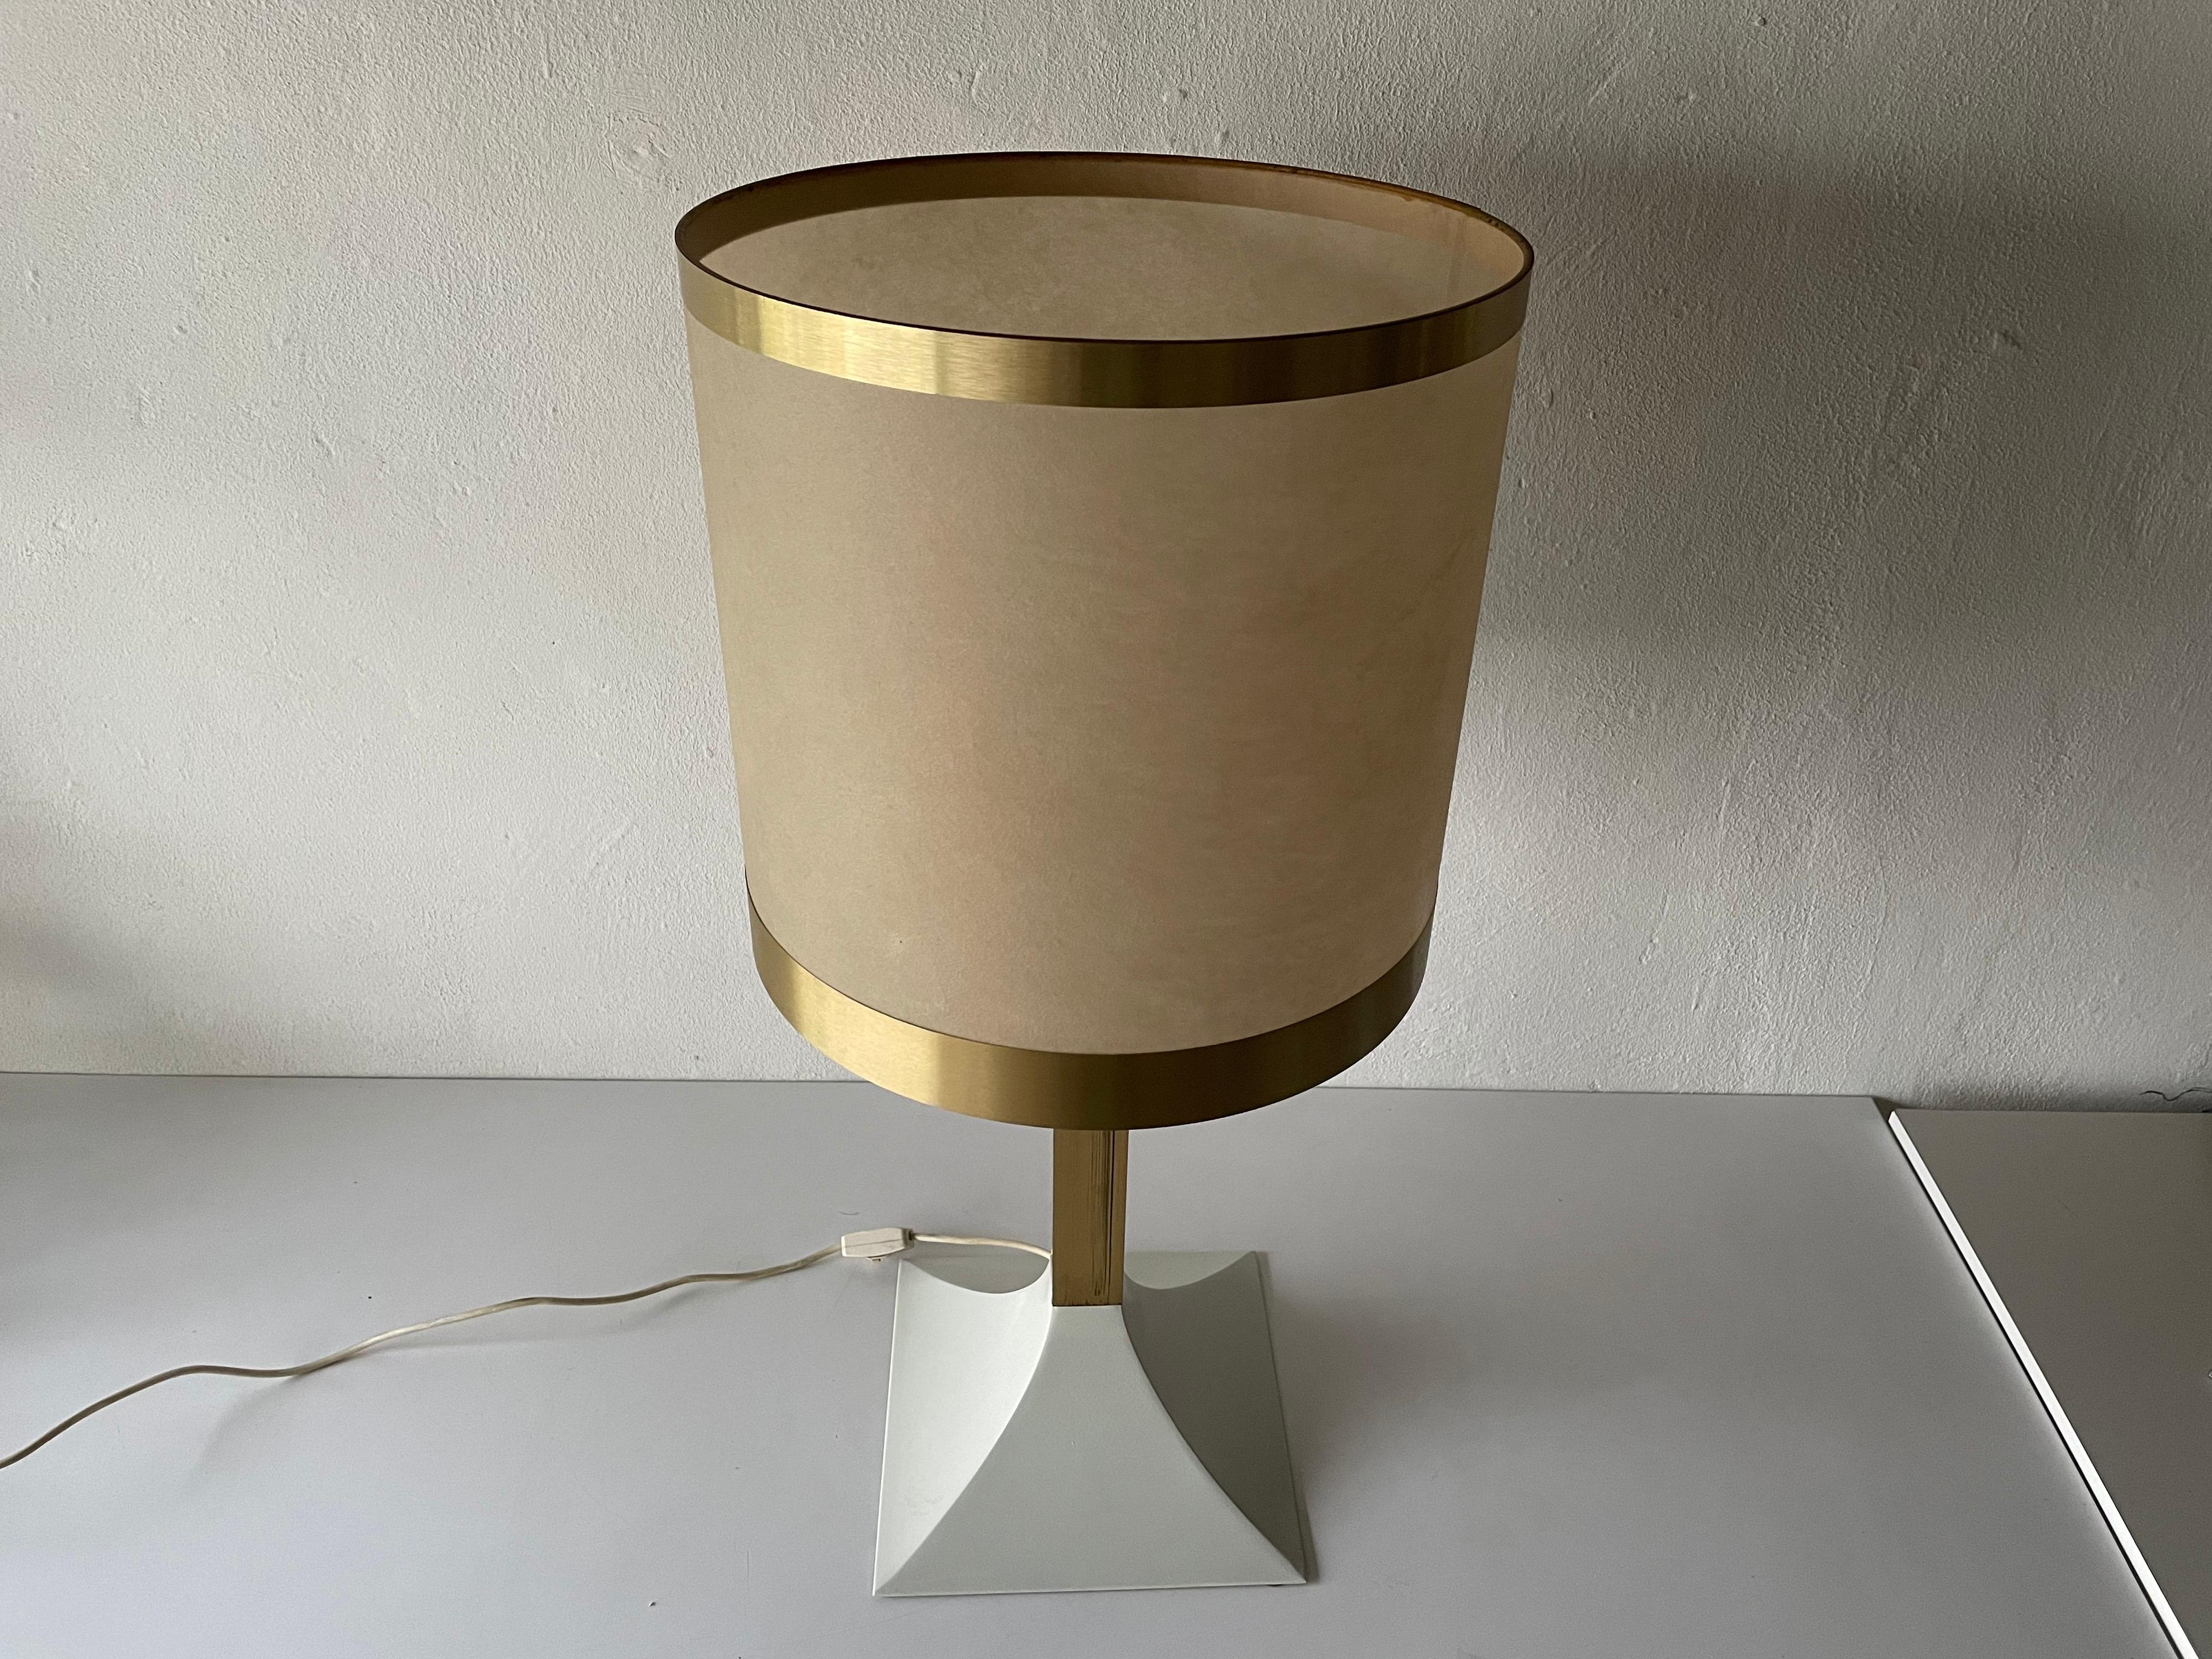 Cocoon and gold metal large table lamp, 1970s, Italy

Minimal and natural design with cocoon material
Very high quality.
Fully functional.


Original cable and plug. This lamp is suitable for EU plug socket. Switch on-off on the